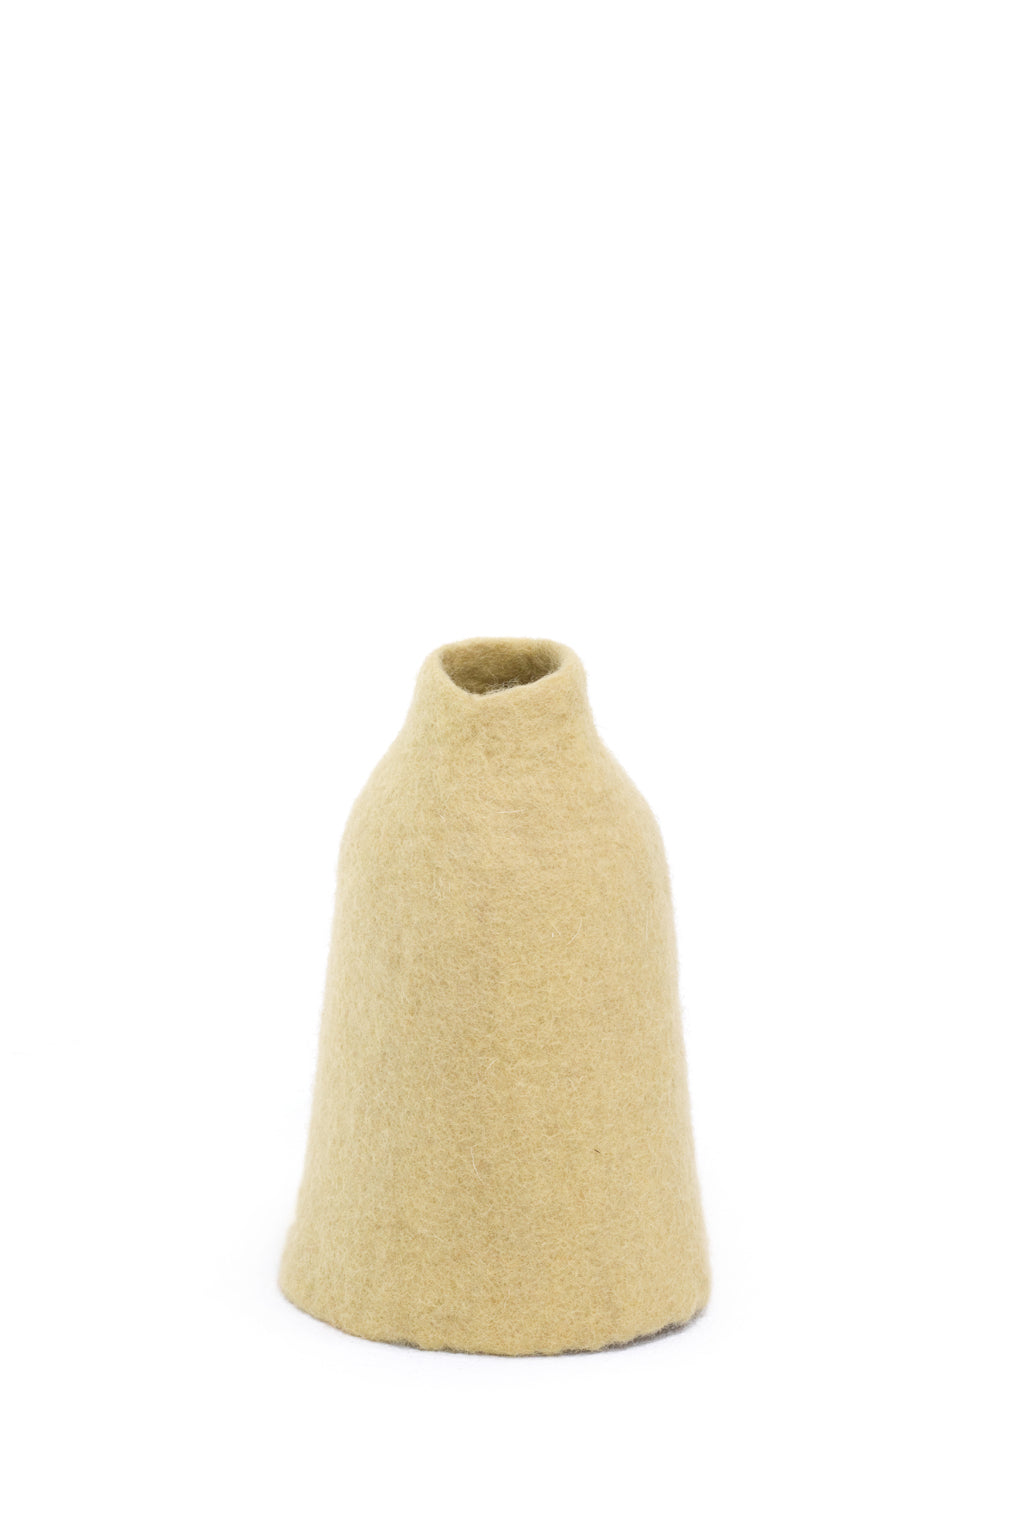 Bell Vase Cover- Small